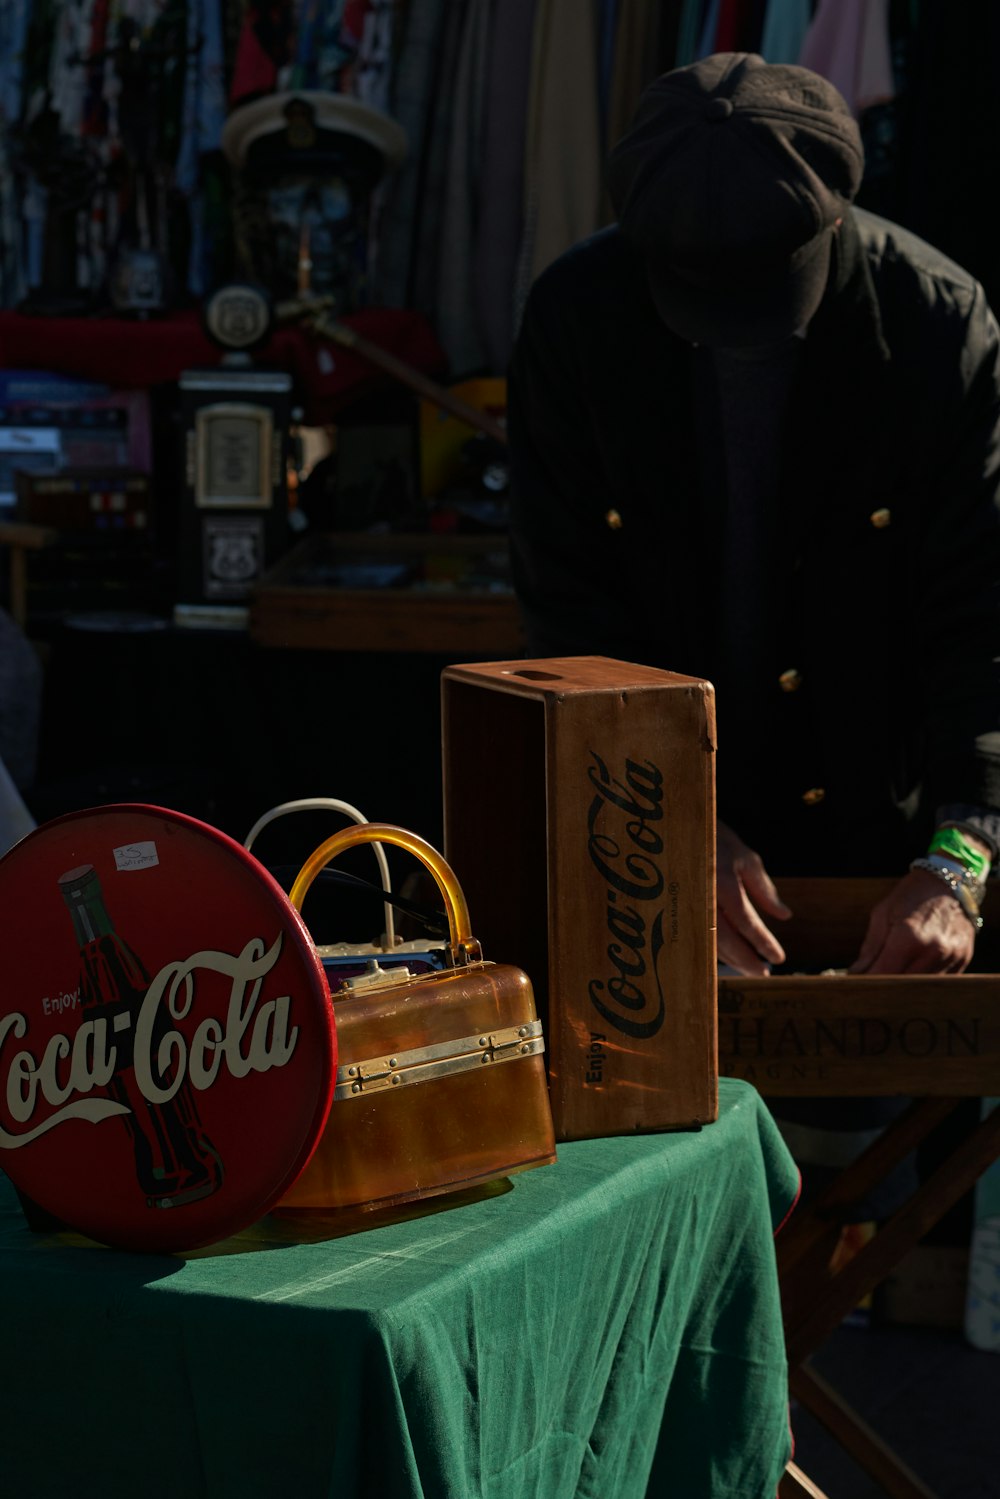 a man standing next to a table with a coca cola sign on it